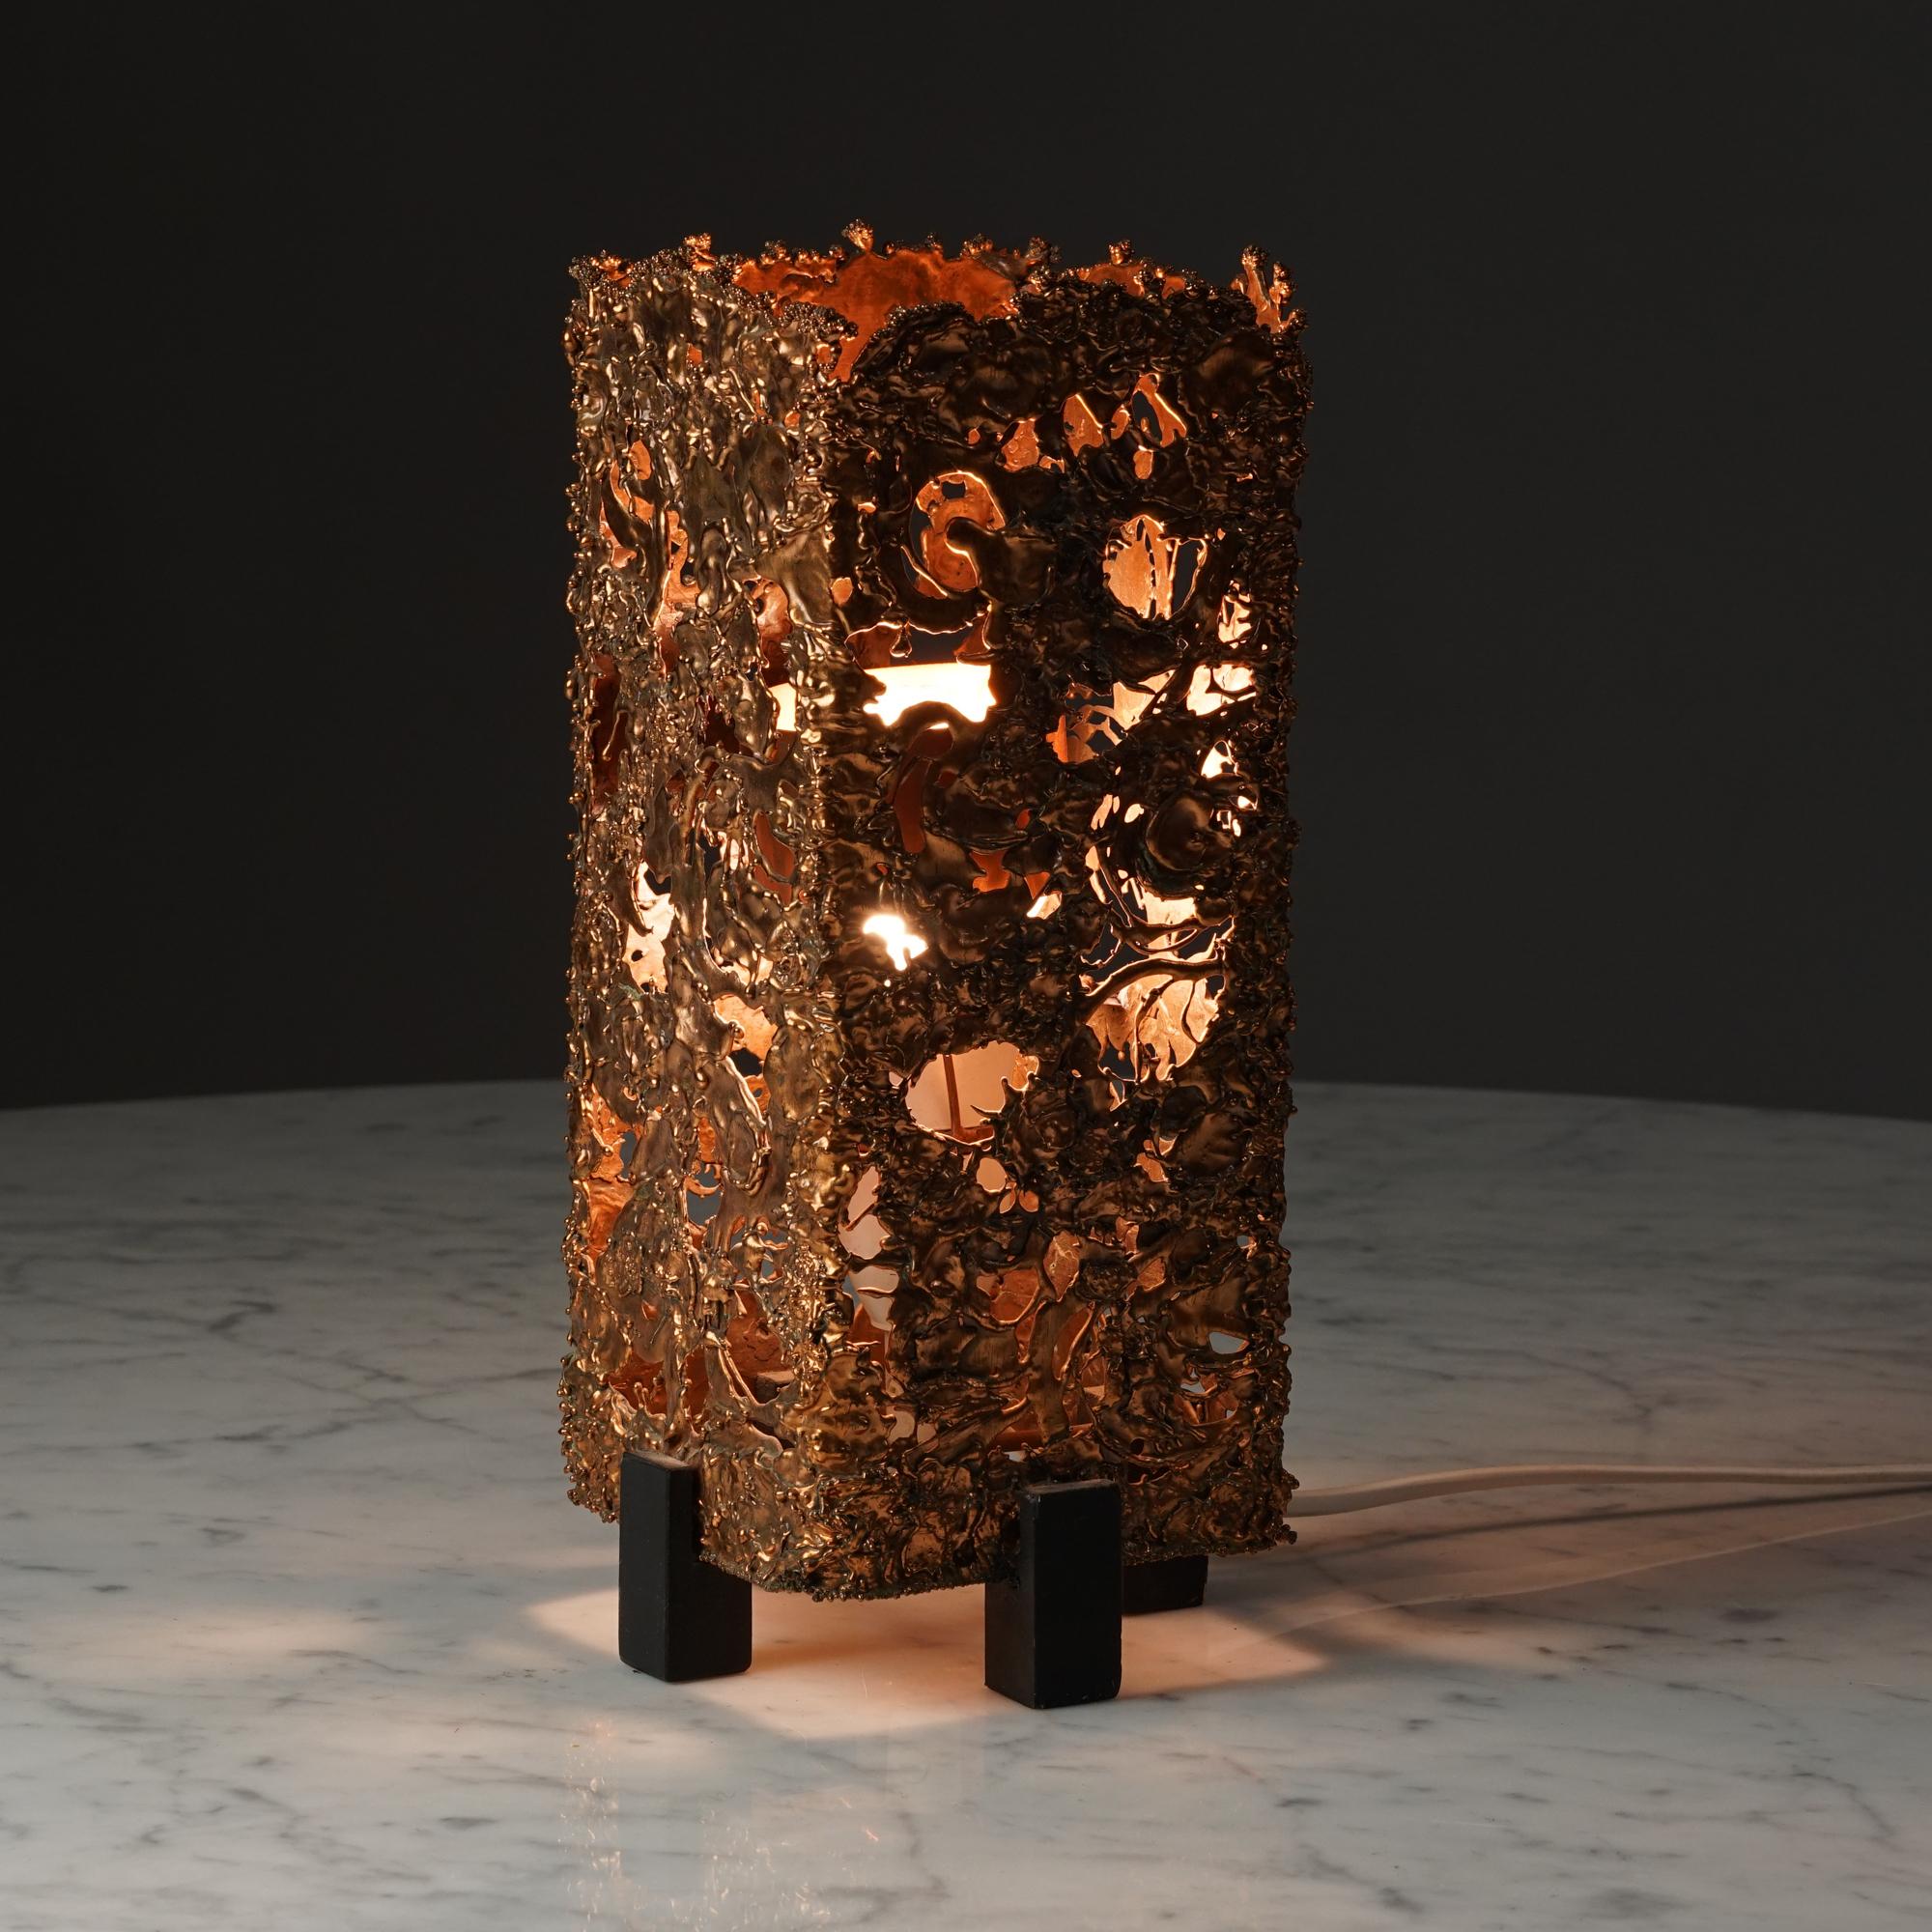 Brutalist Table lamp by Aimo Tukiainen, 1960s, Finland. Melted coppper and wood. This table lamp model is one of the many Aimo Tukiainen designs made of copper. 
Measurments: width 11 cm, depth 11 cm, height 28.5 cm.